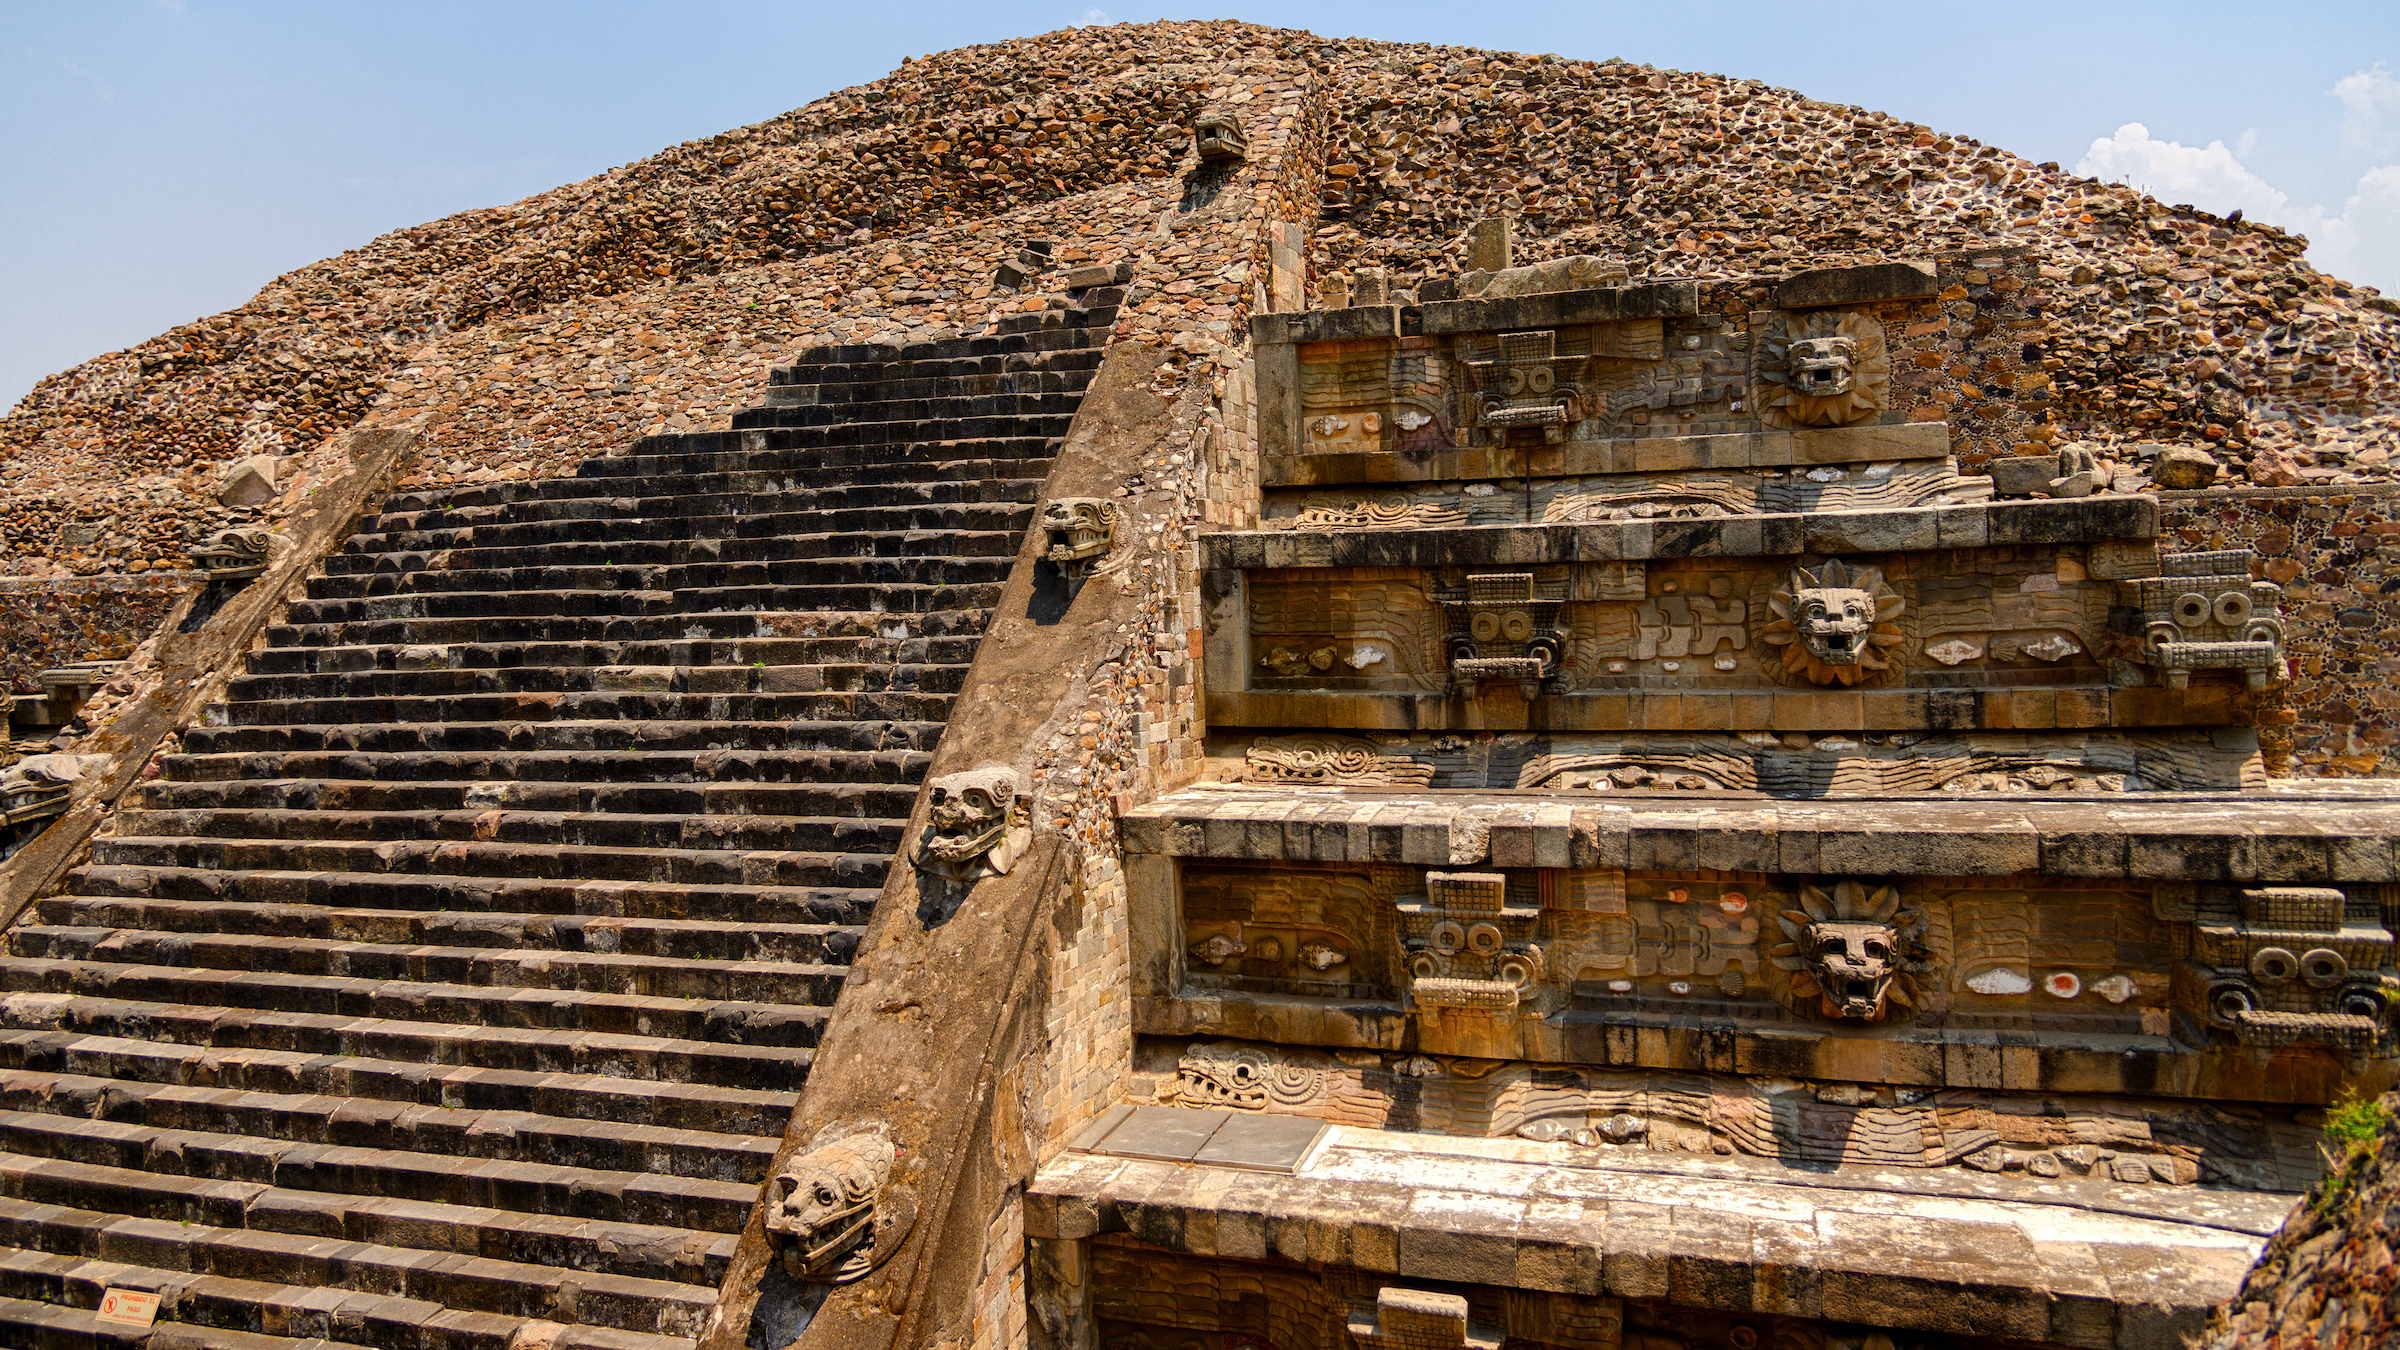 The Temple of the Feathered Serpent at Teotihuacan, Mexico.